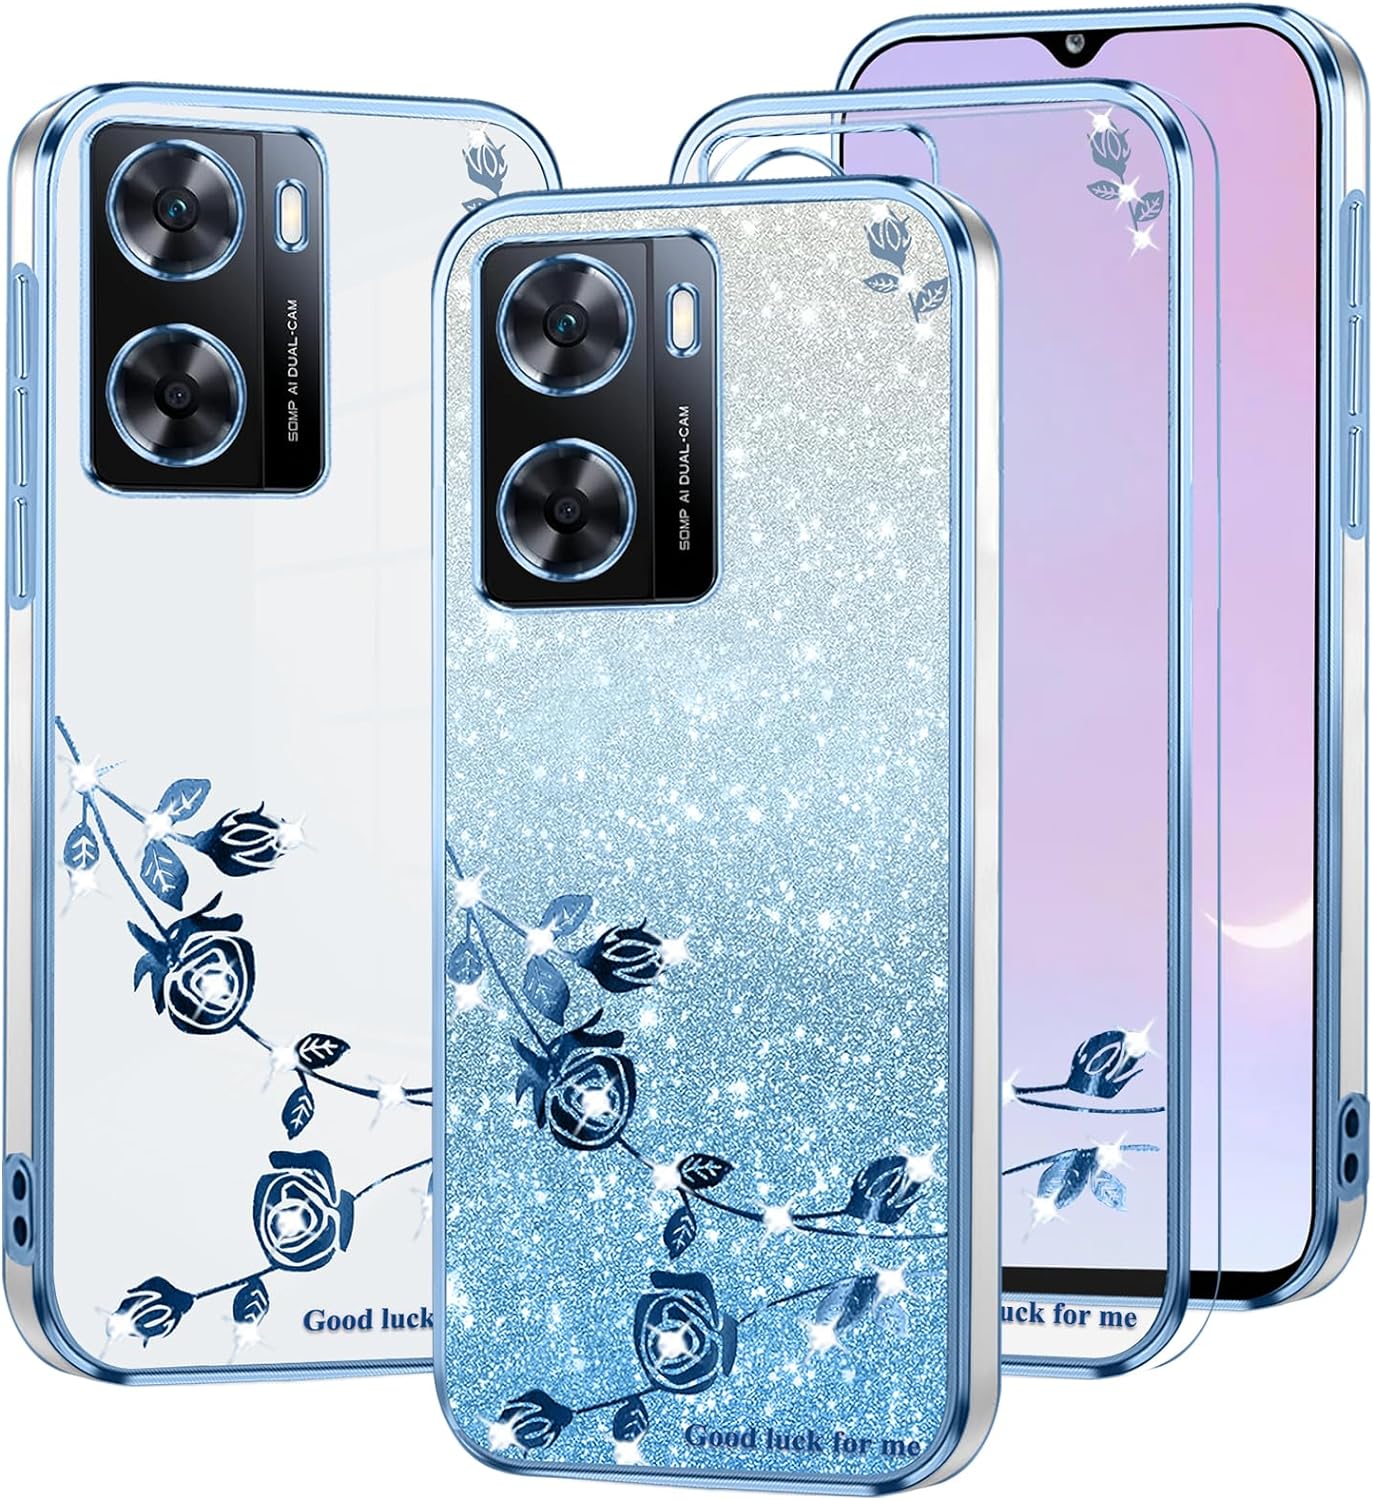 Kainevy Phone Case for Oppo A57 4G Case Clear Glitter Blue Floral for Women Girls Cute Pretty Bling Cover Oppo A57 Phone Case Silicone Shockproof Slim Diamond Sparkle Luxury (Blue)